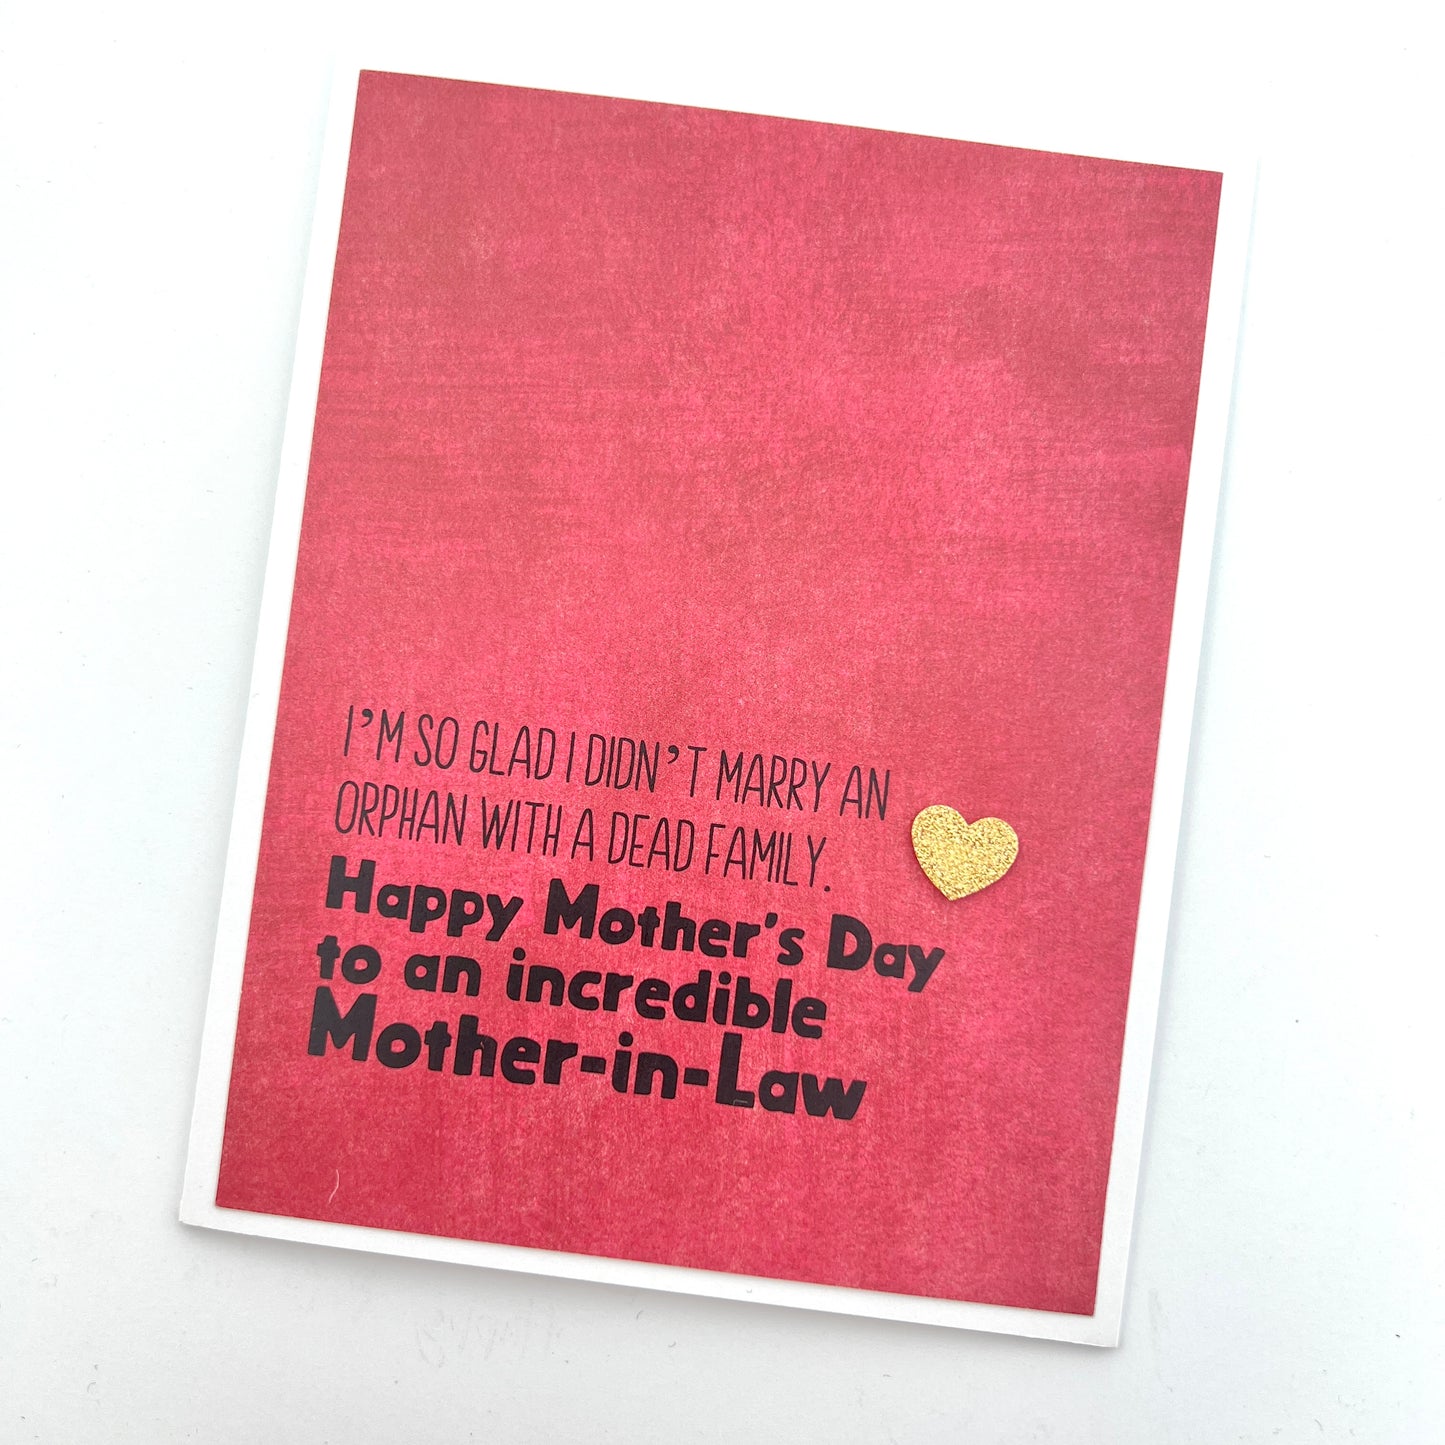 Mother’s Day Didn’t Marry an Orphan Mother in Law card